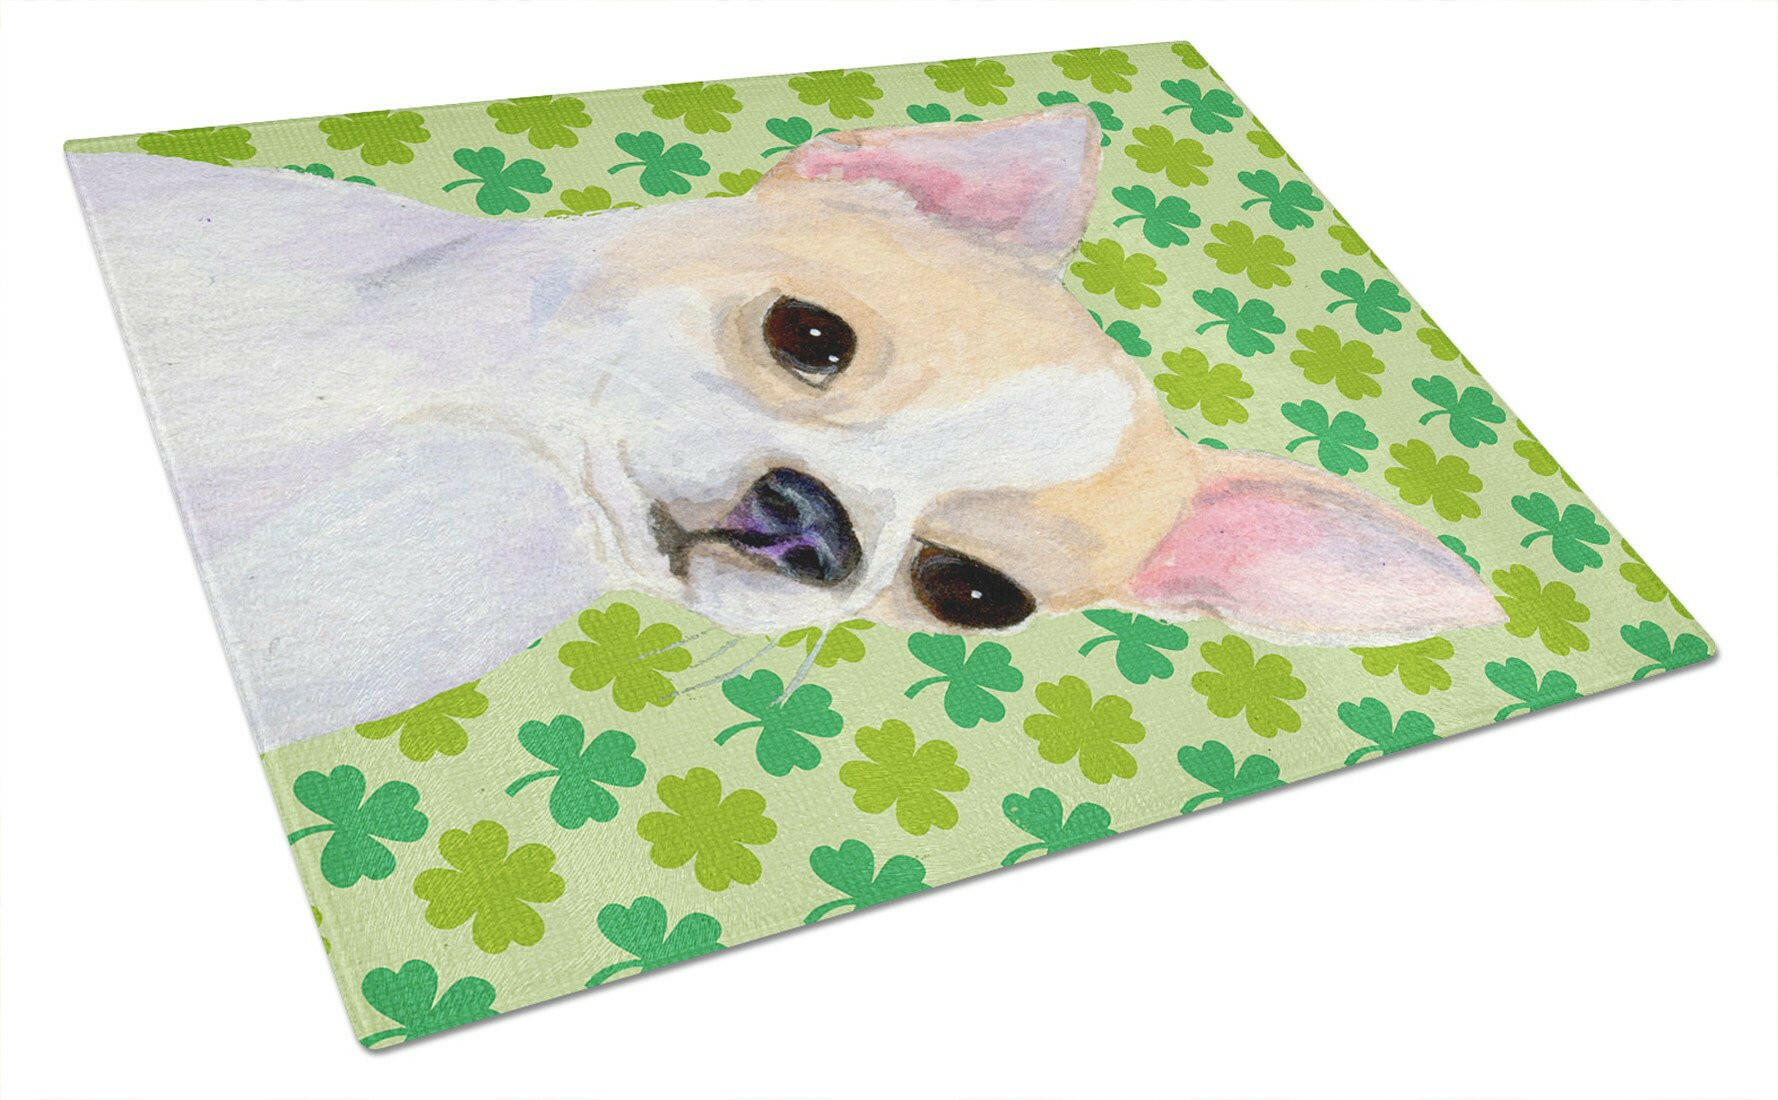 Chihuahua St. Patrick's Day Shamrock Portrait Glass Cutting Board Large by Caroline's Treasures